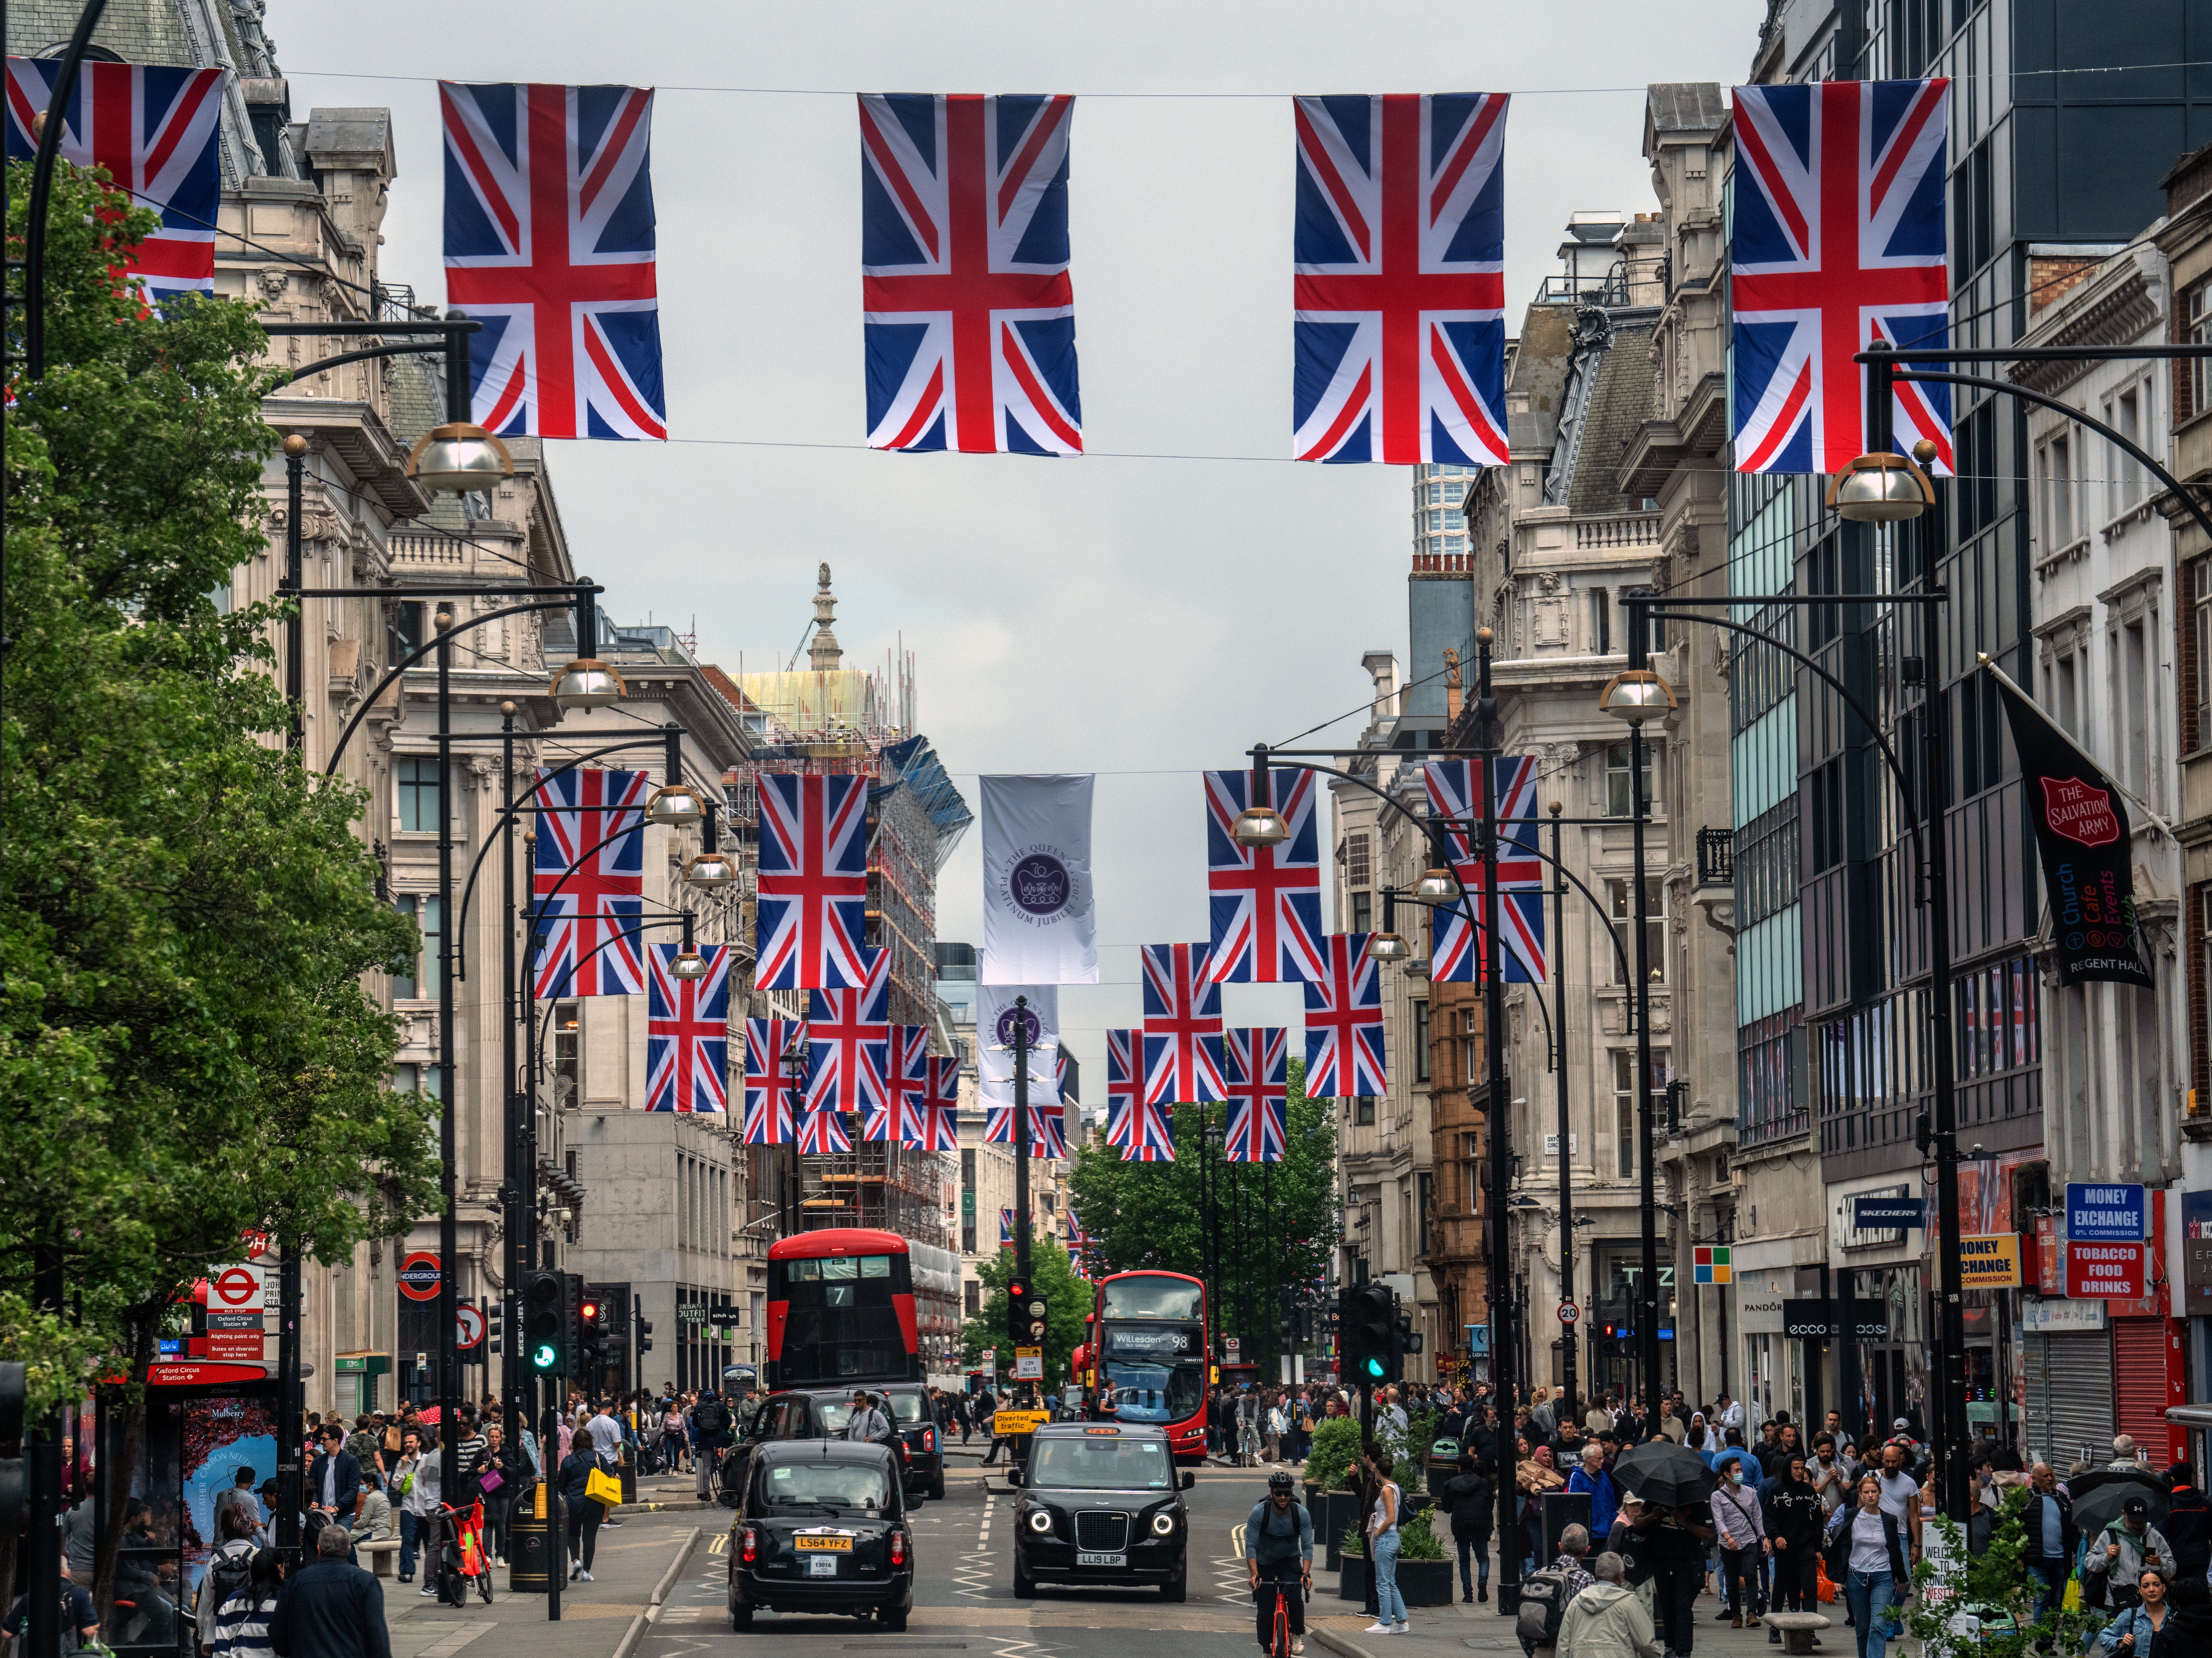 Union Jack flags displayed across London’s Oxford Street to mark the forthcoming Platinum Jubilee celebrations